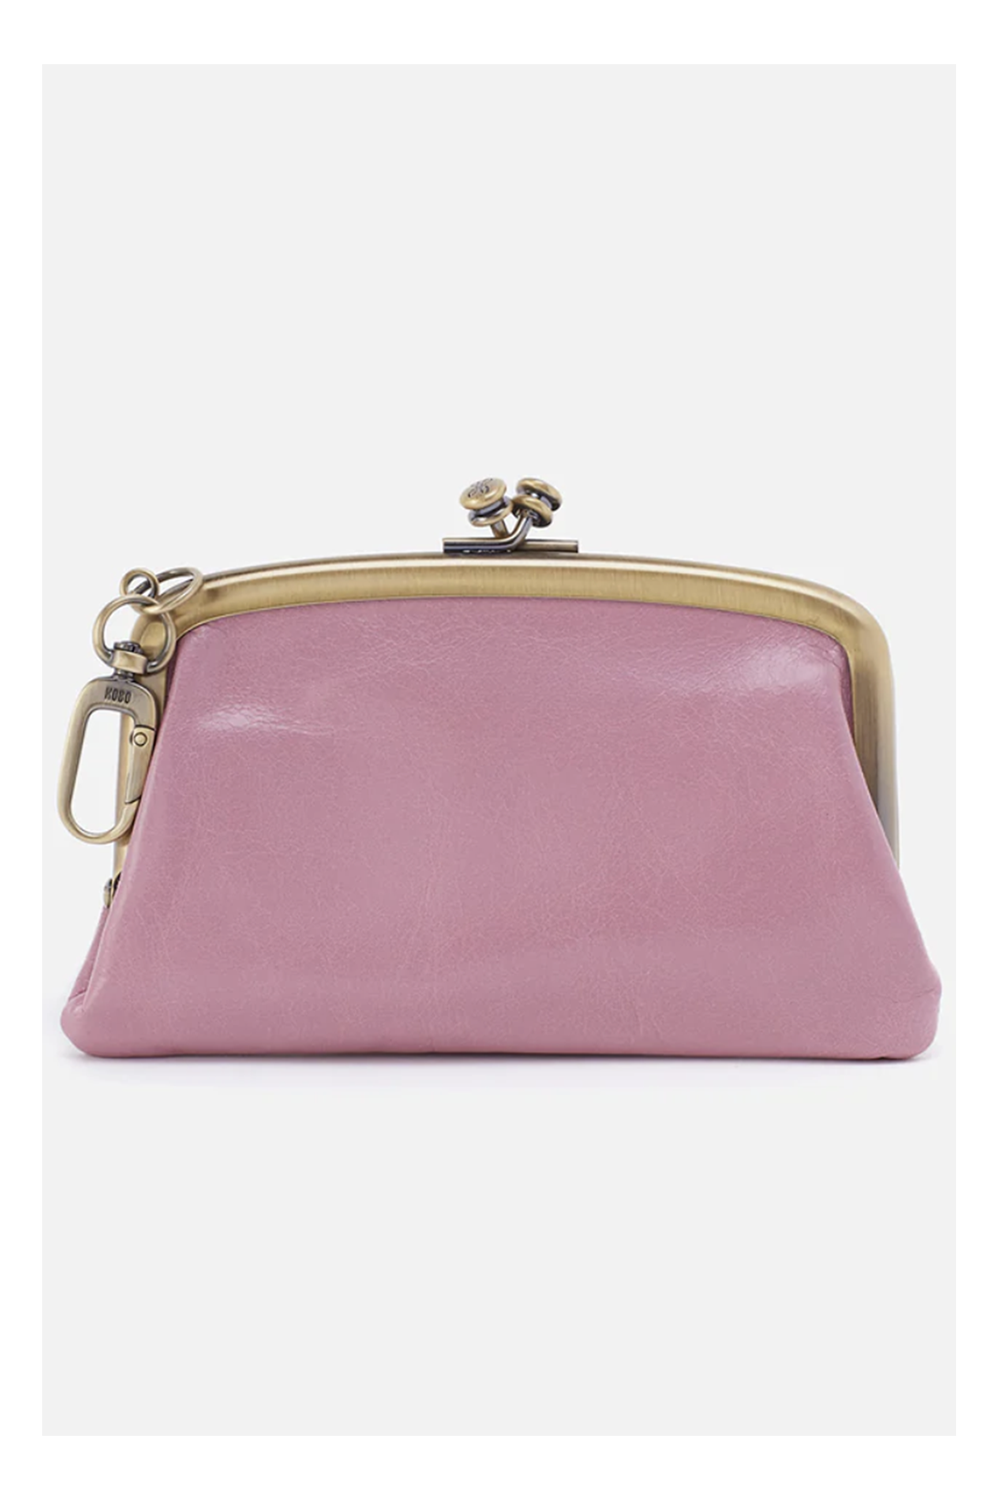 Cheer Framed Pouch - Lilac Rose